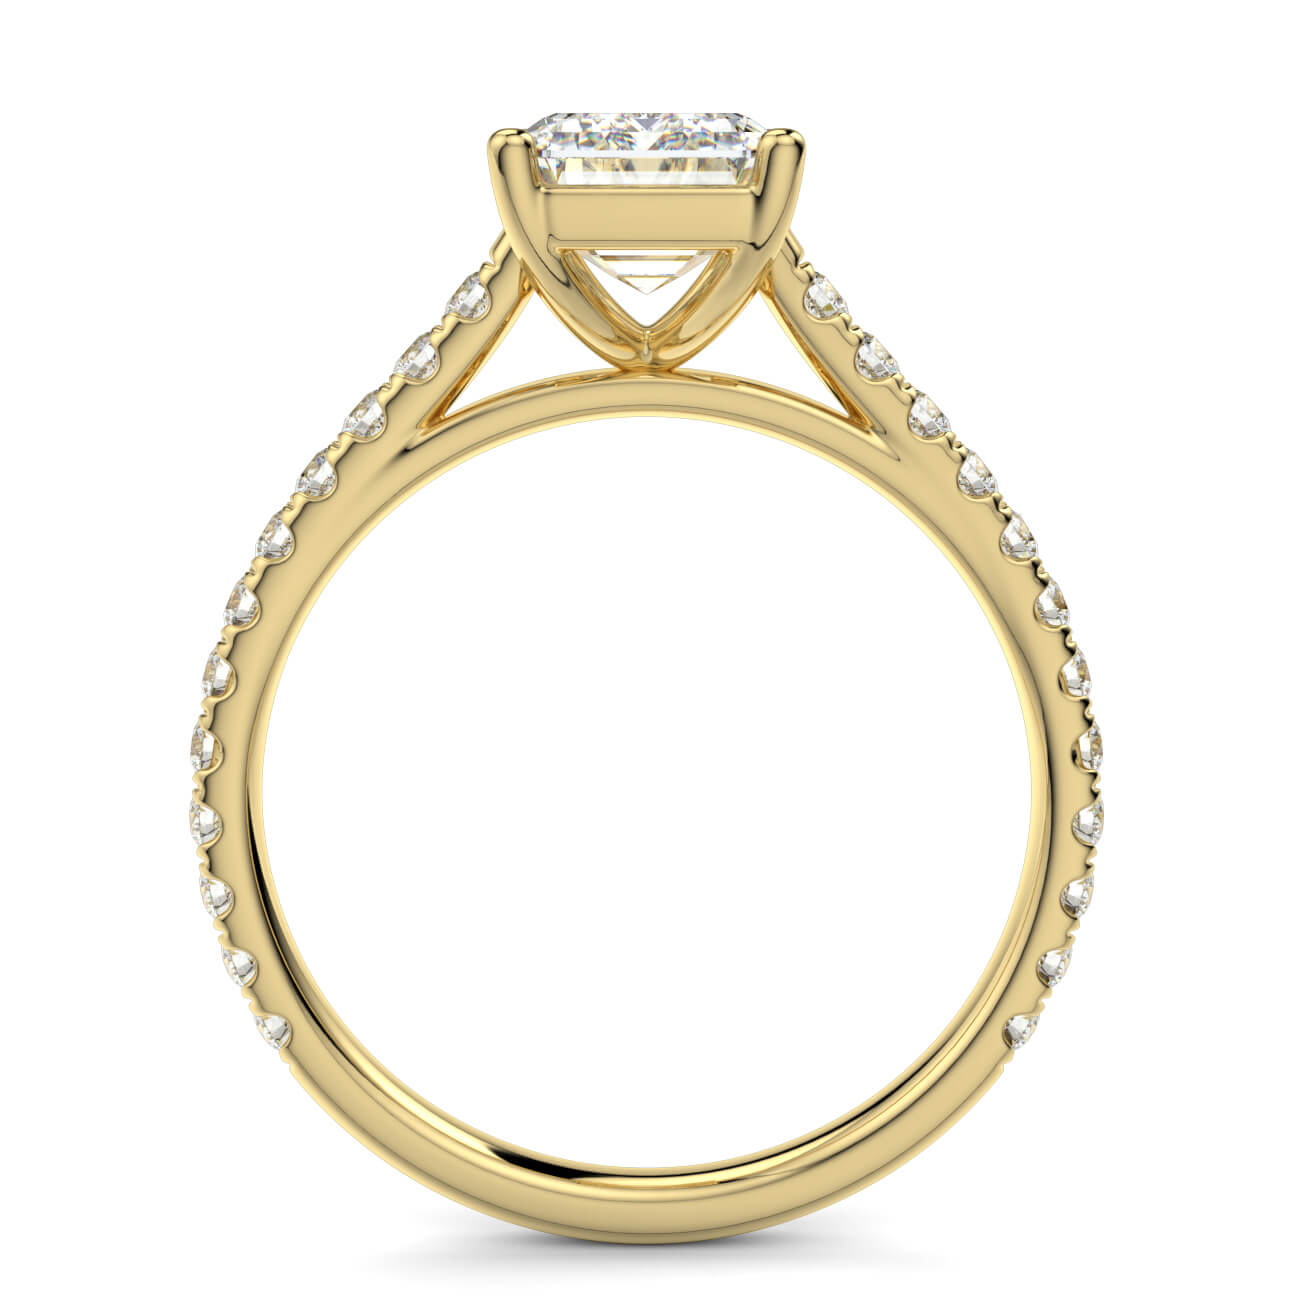 Emerald Cut diamond cathedral engagement ring in yellow gold – Australian Diamond Network